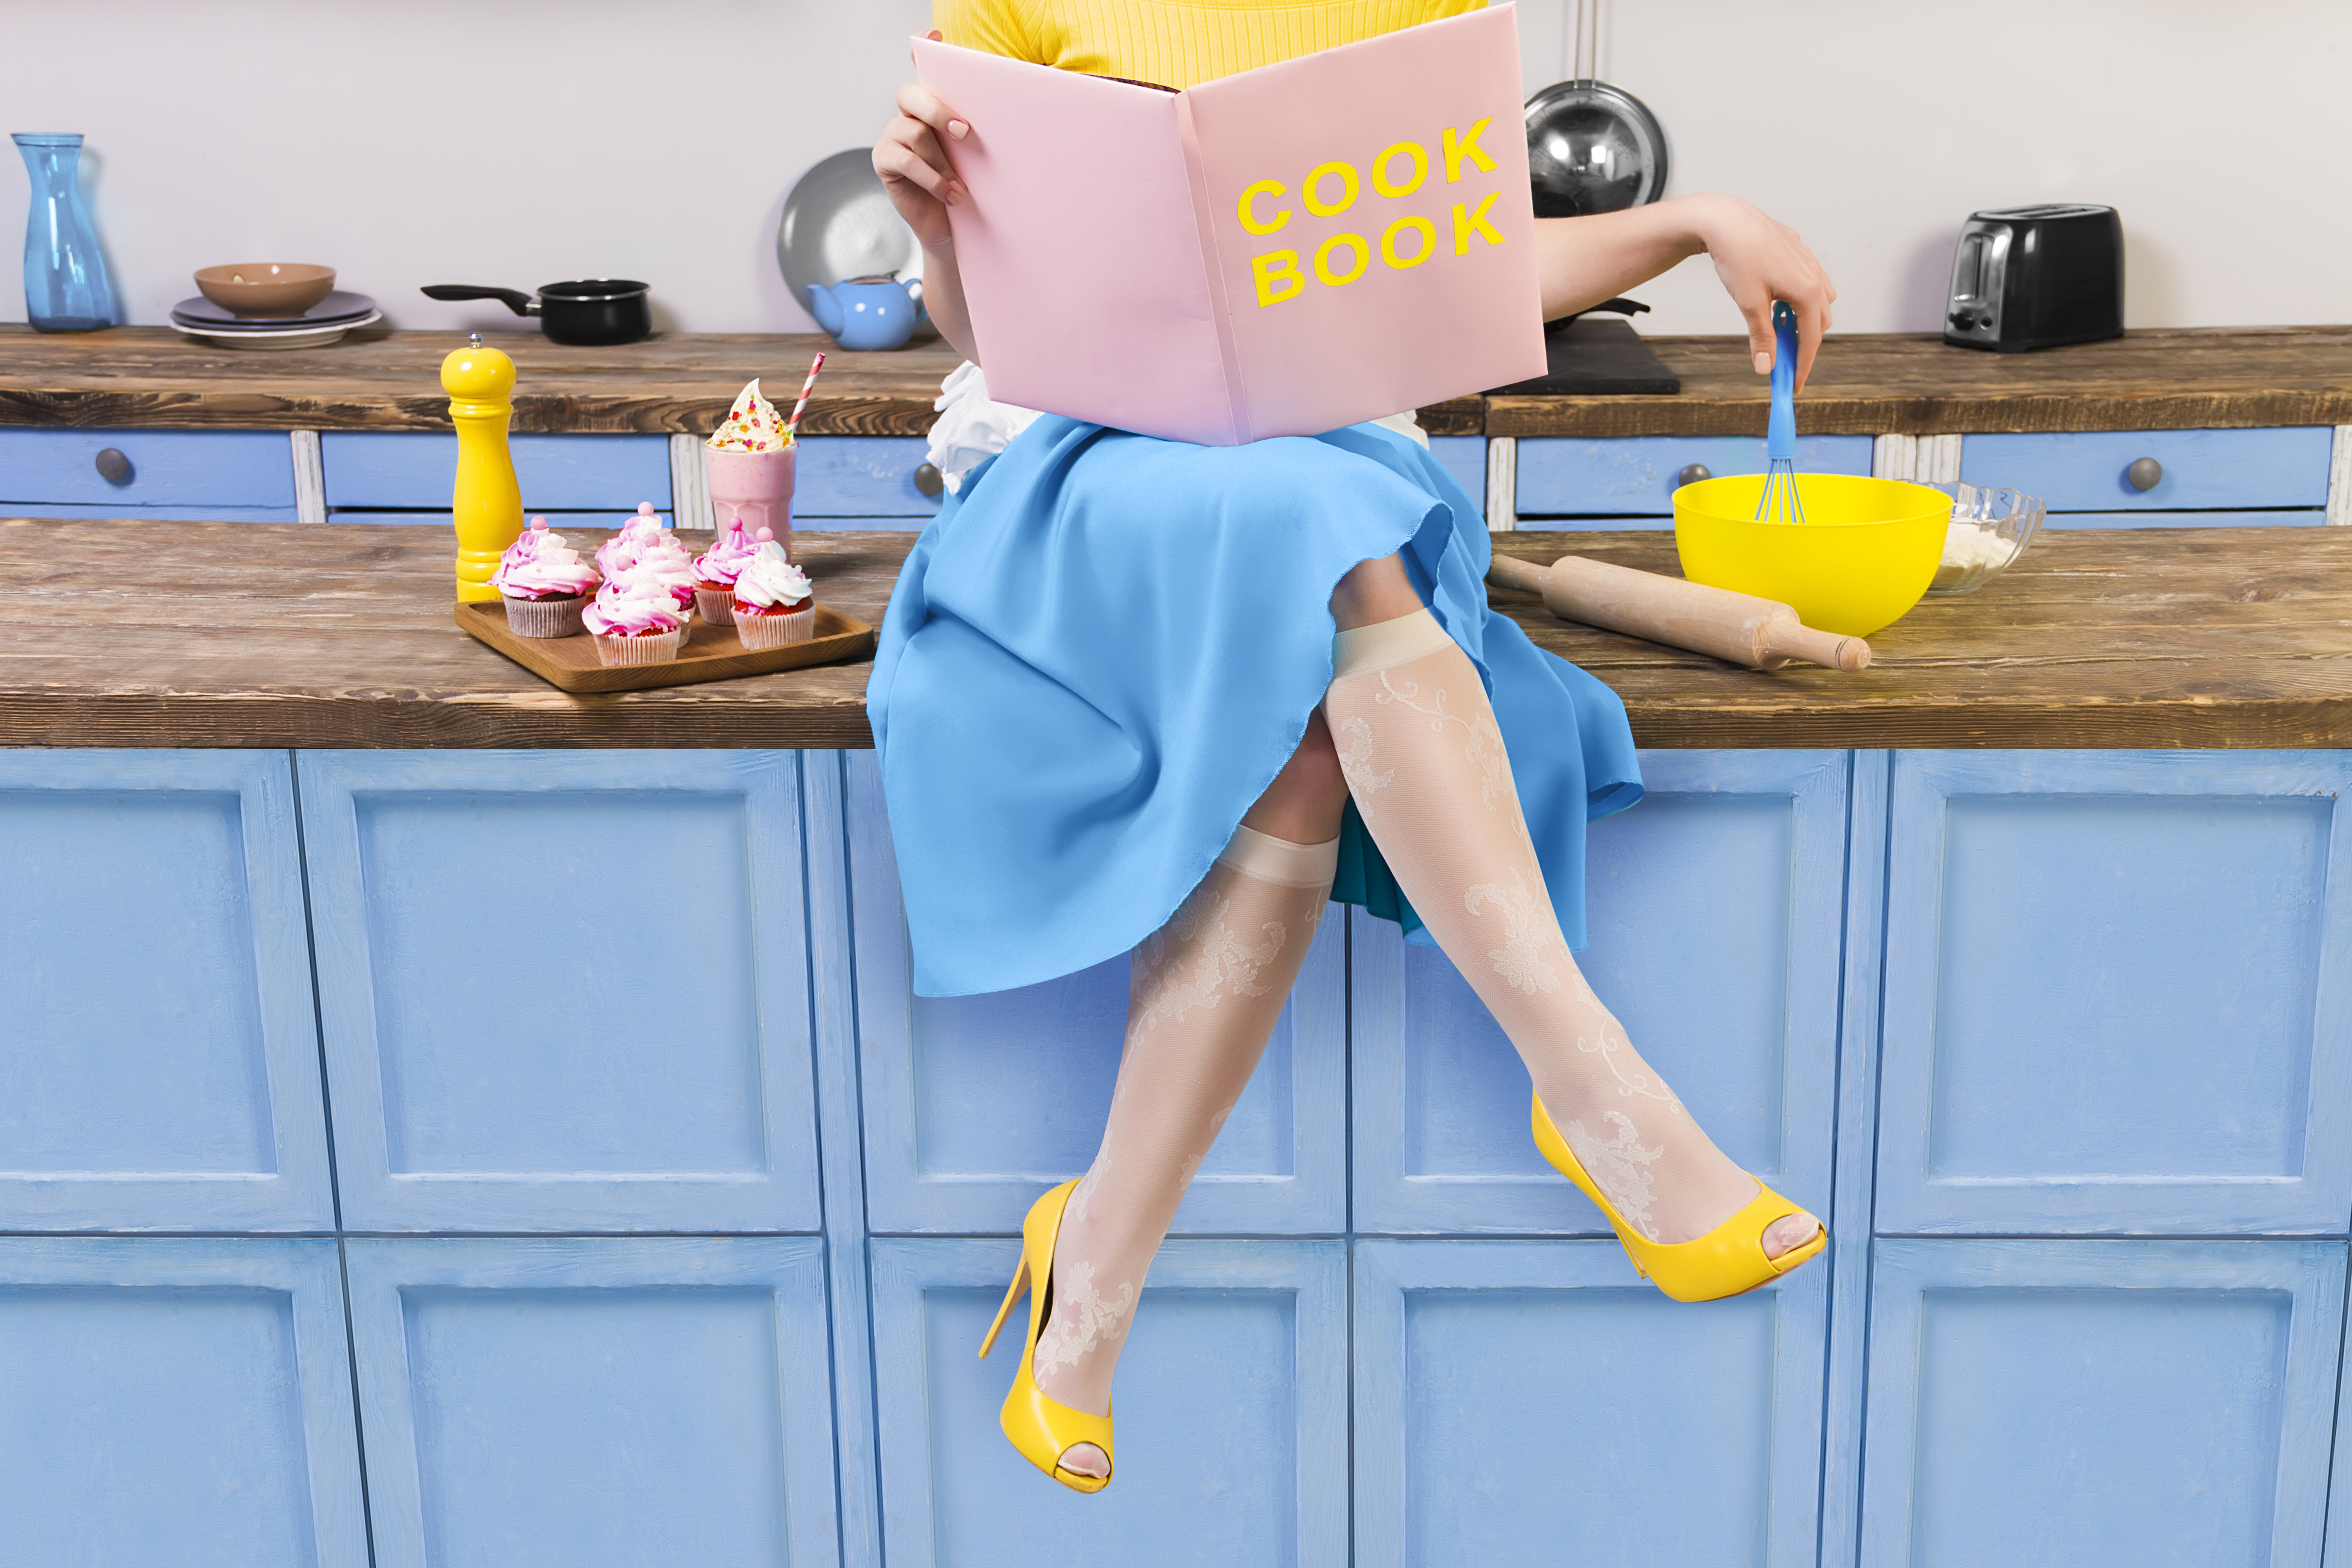 A woman sits on a kitchen counter with baking supplies holding a cook book.